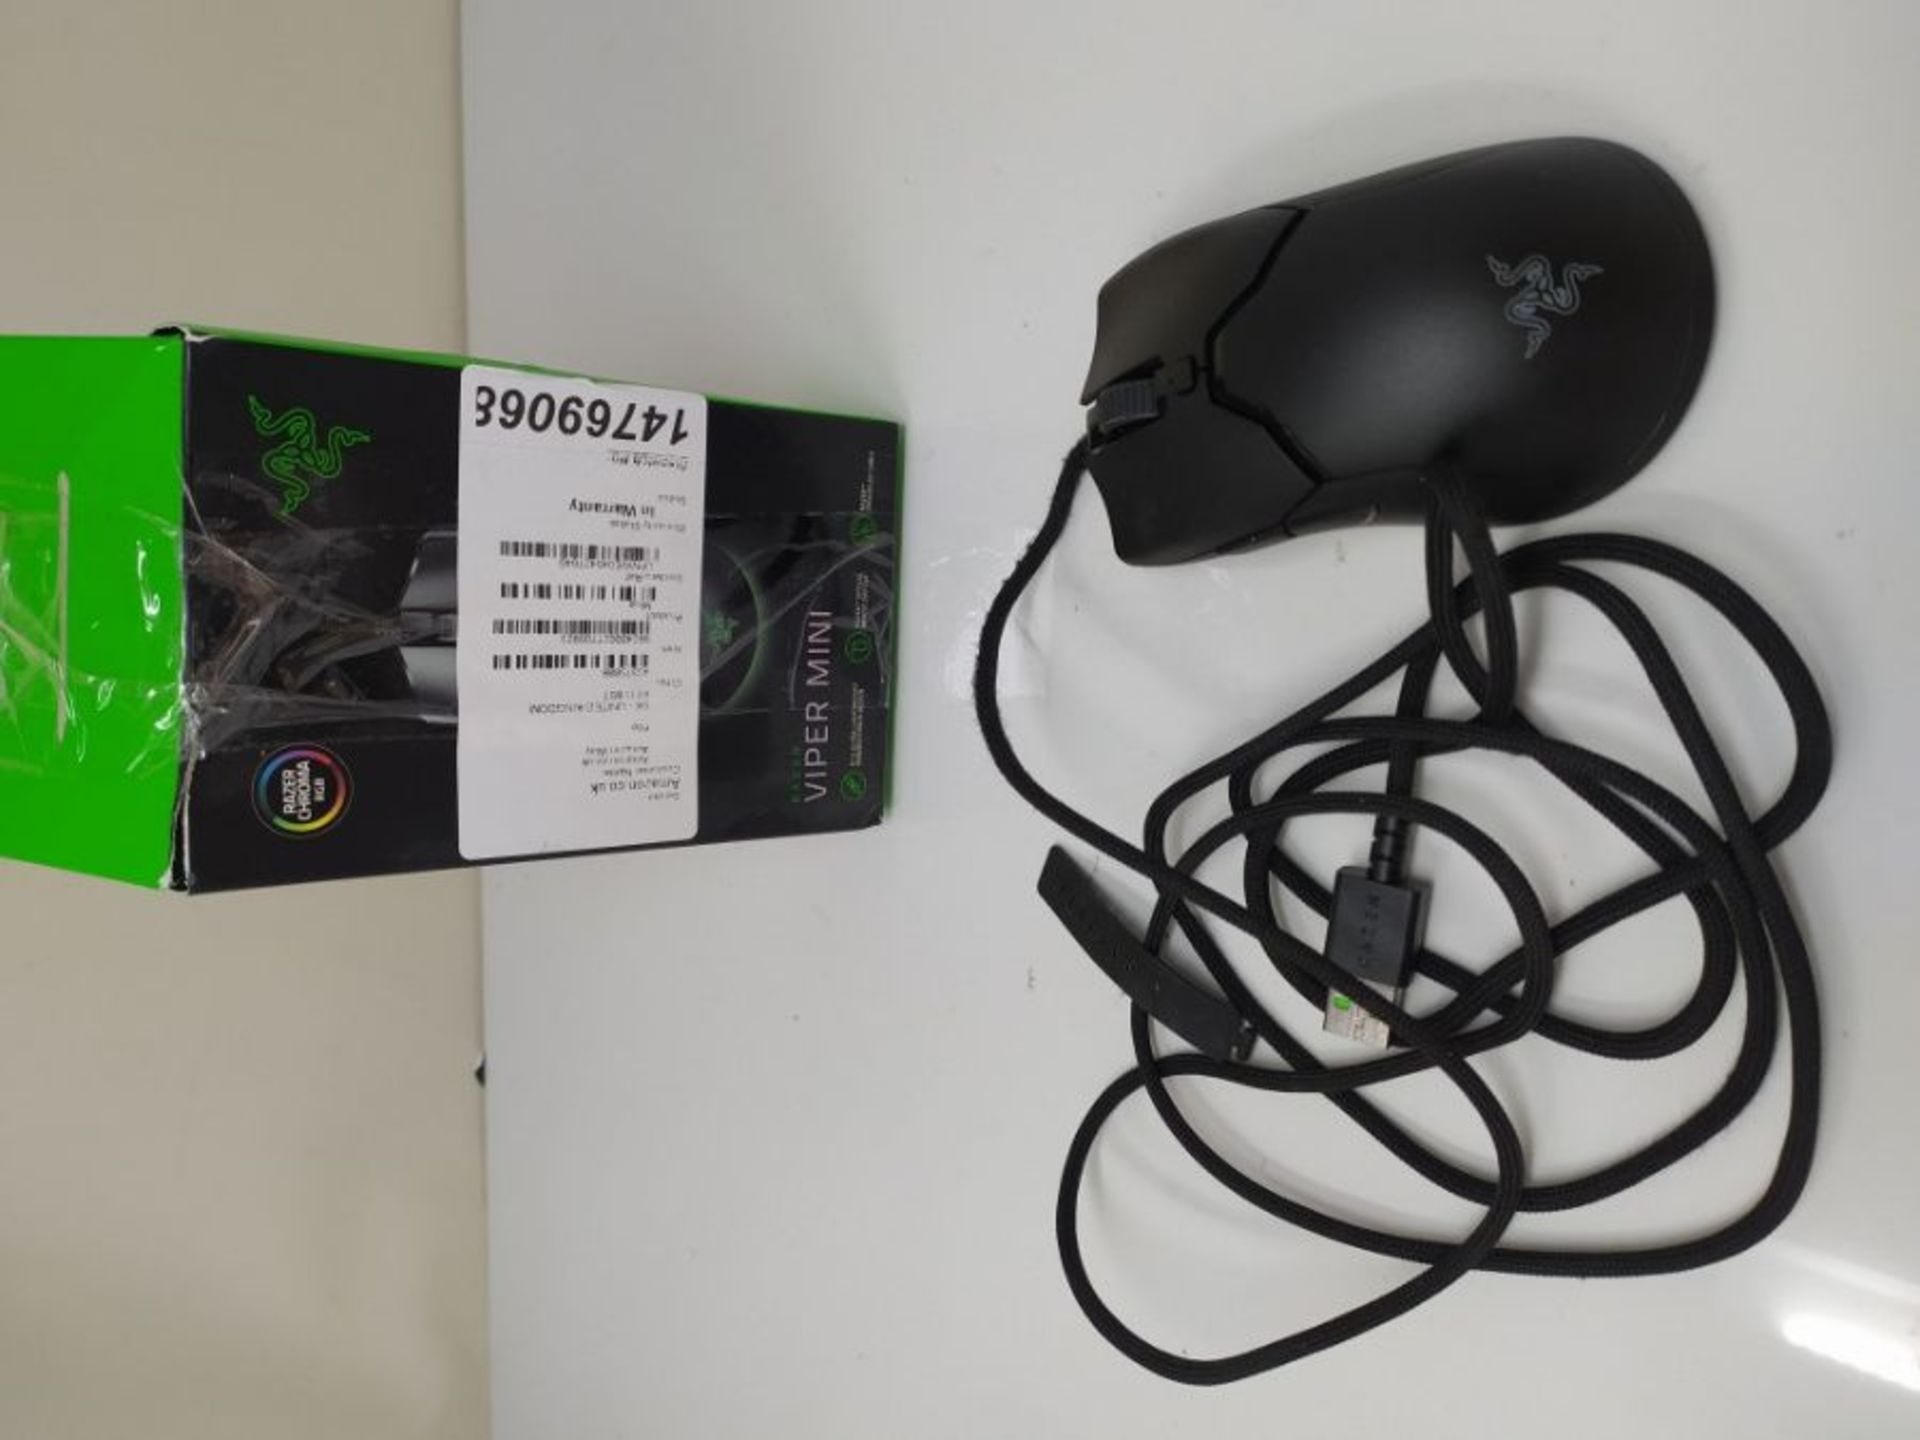 Razer Viper Mini Gaming Mouse, Ambidextrous Gaming Mouse, Only 61 g, 8500 DPI Optical - Image 2 of 2